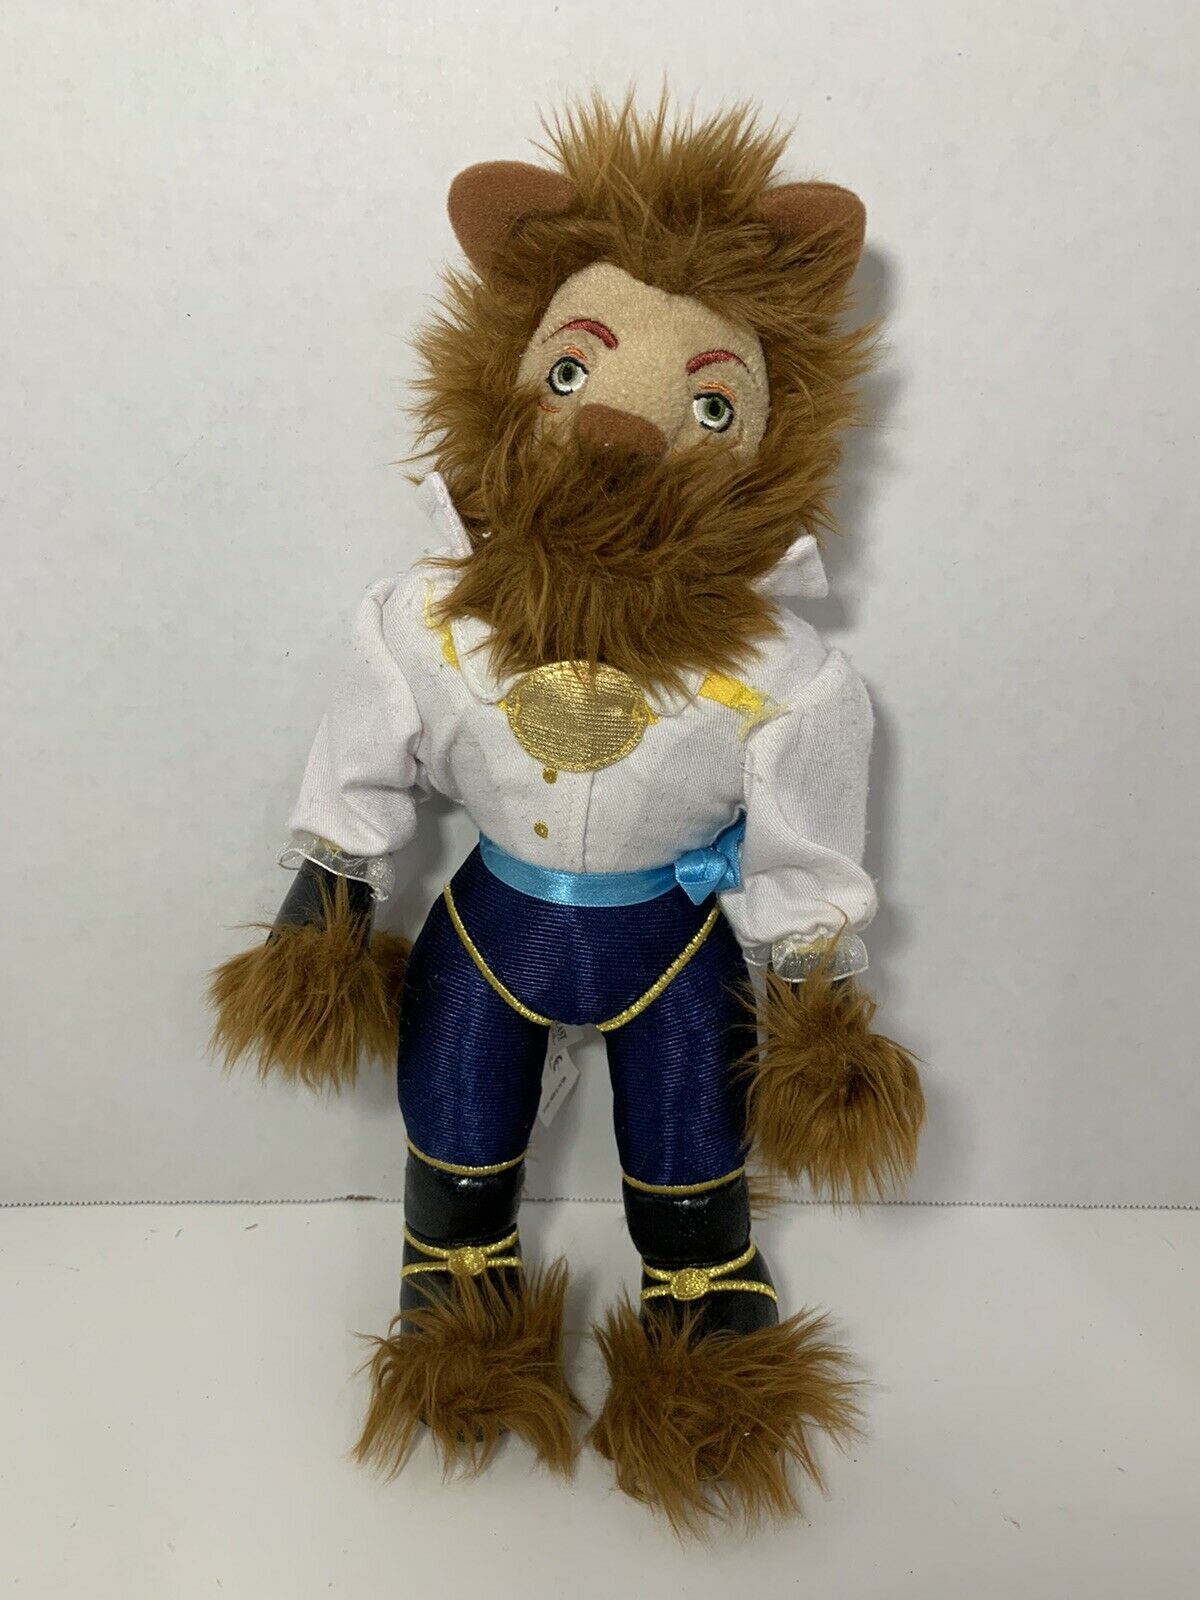 Primary image for Disney Beauty and the Beast Broadway musical 14” plush doll stuffed toy